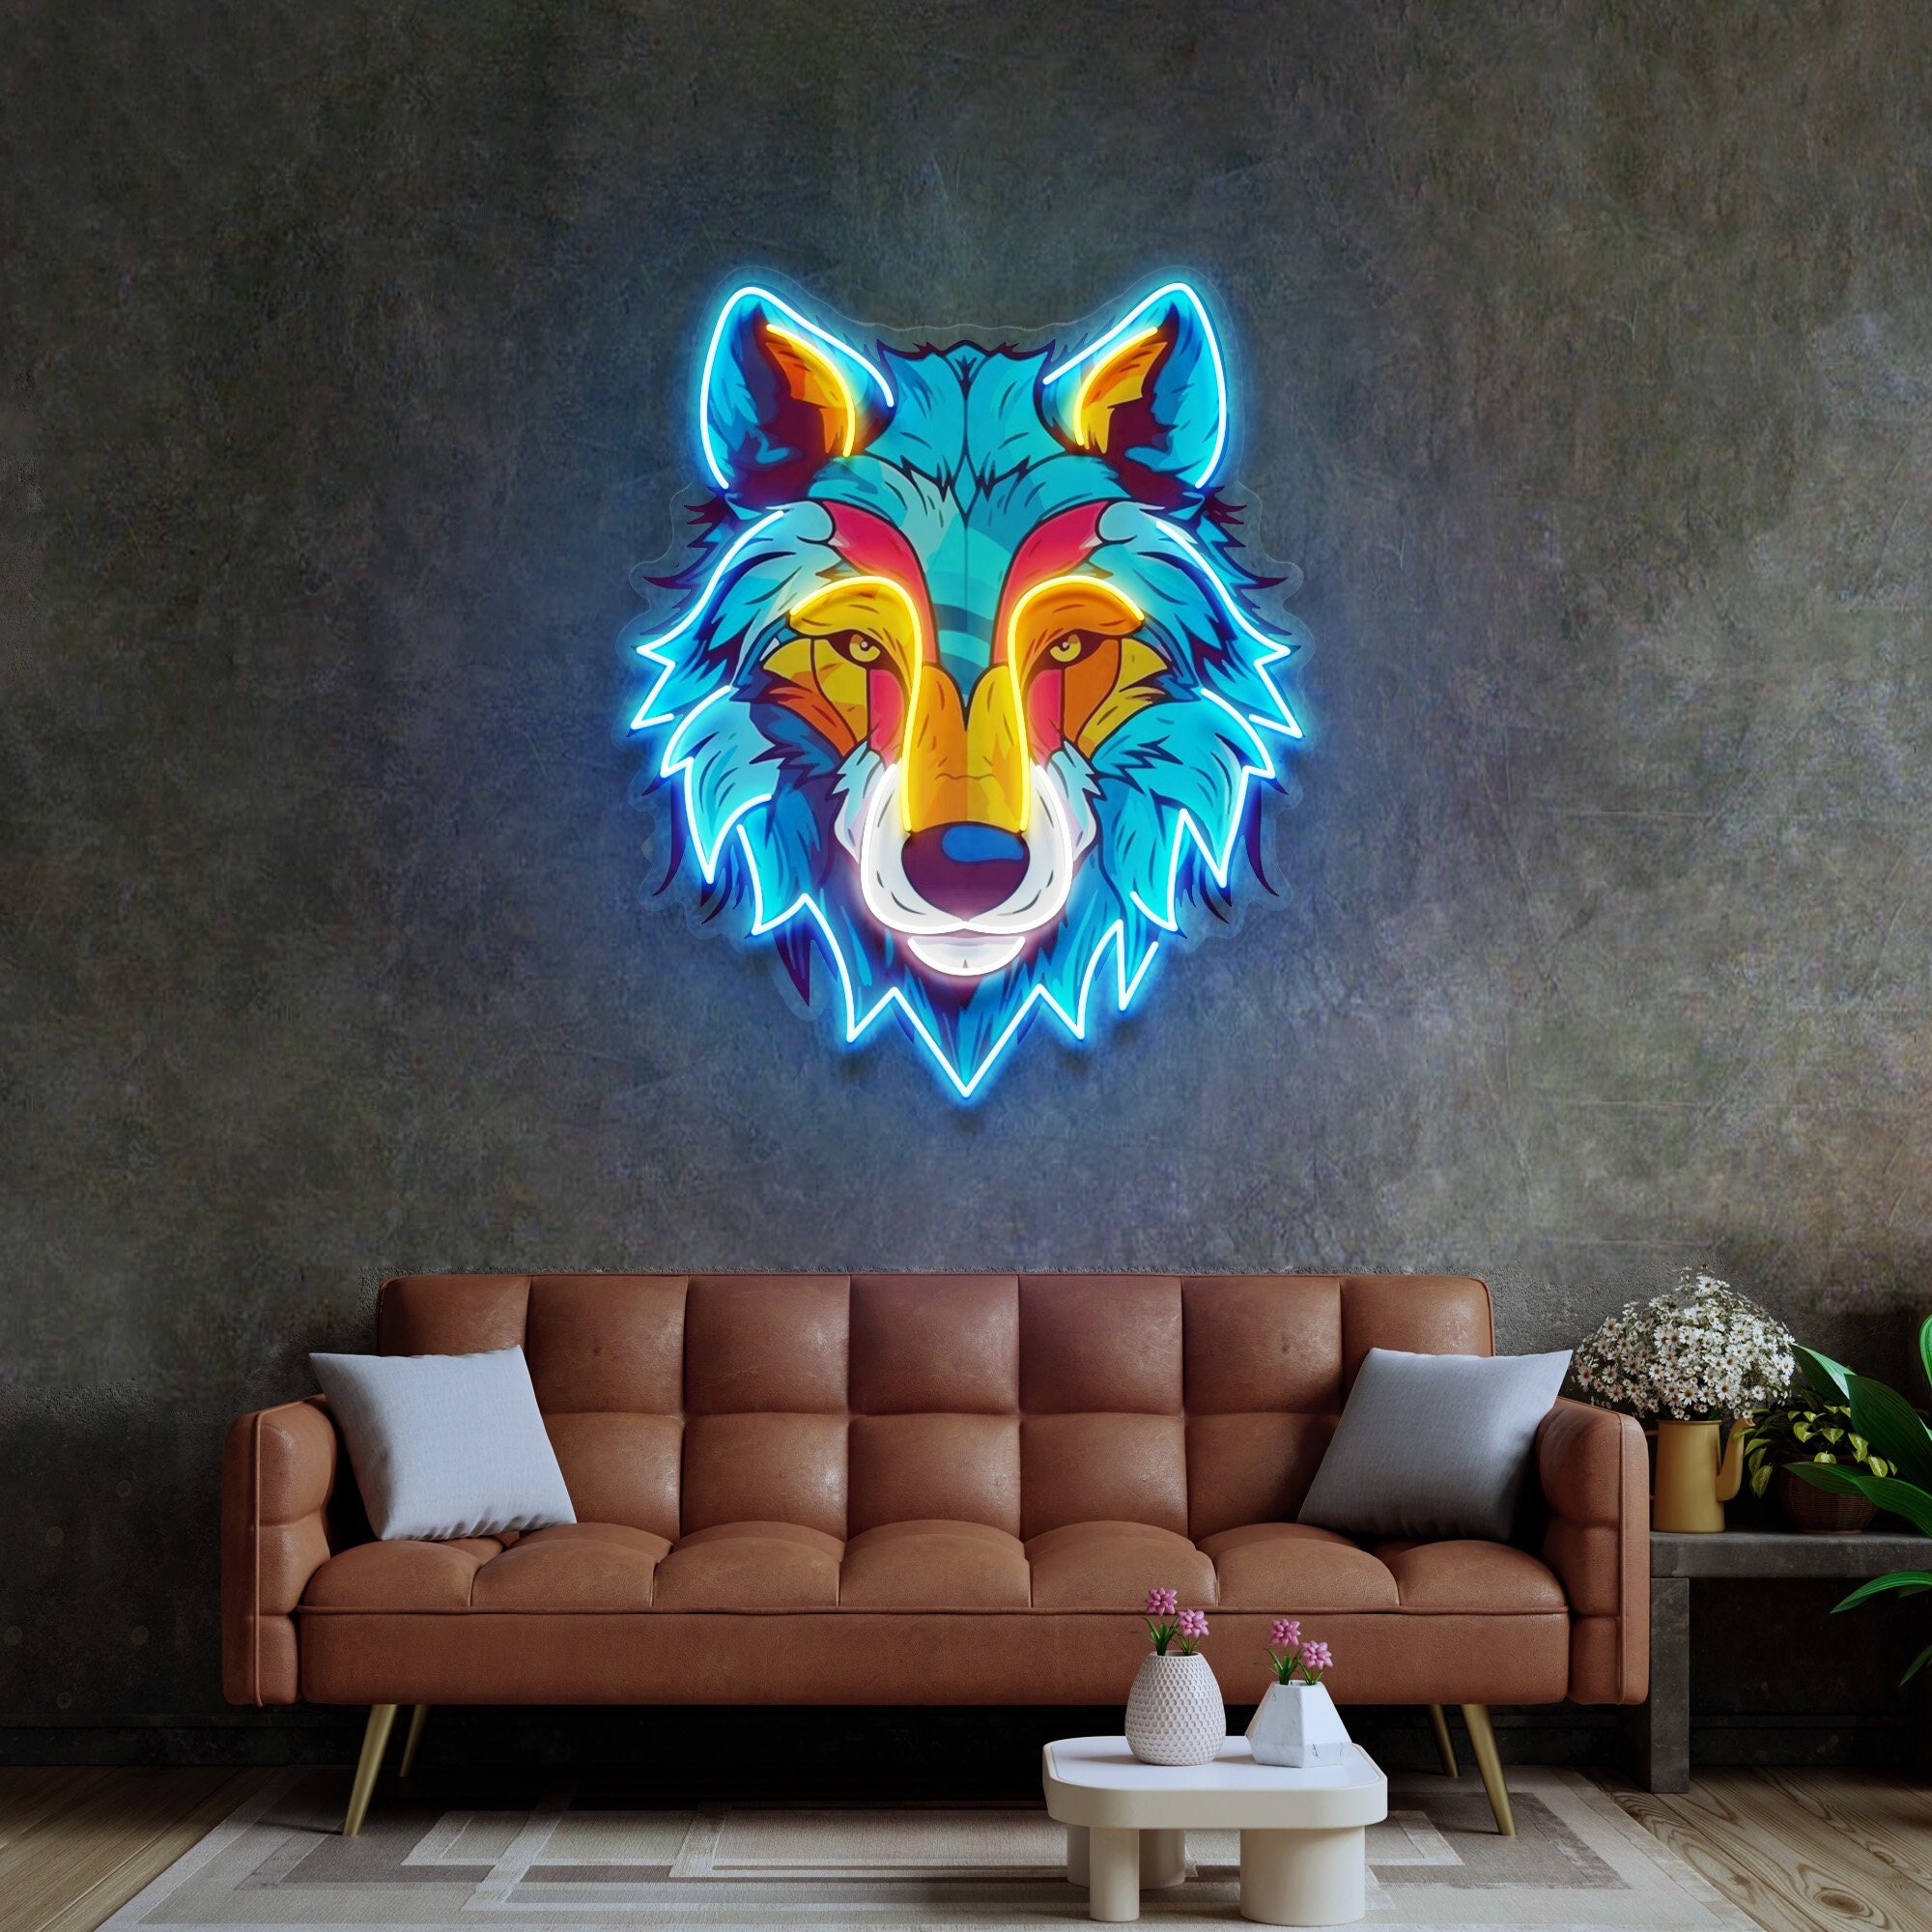 The Witcher Wolf and Raven Metal Wall Art for Game Room and Home